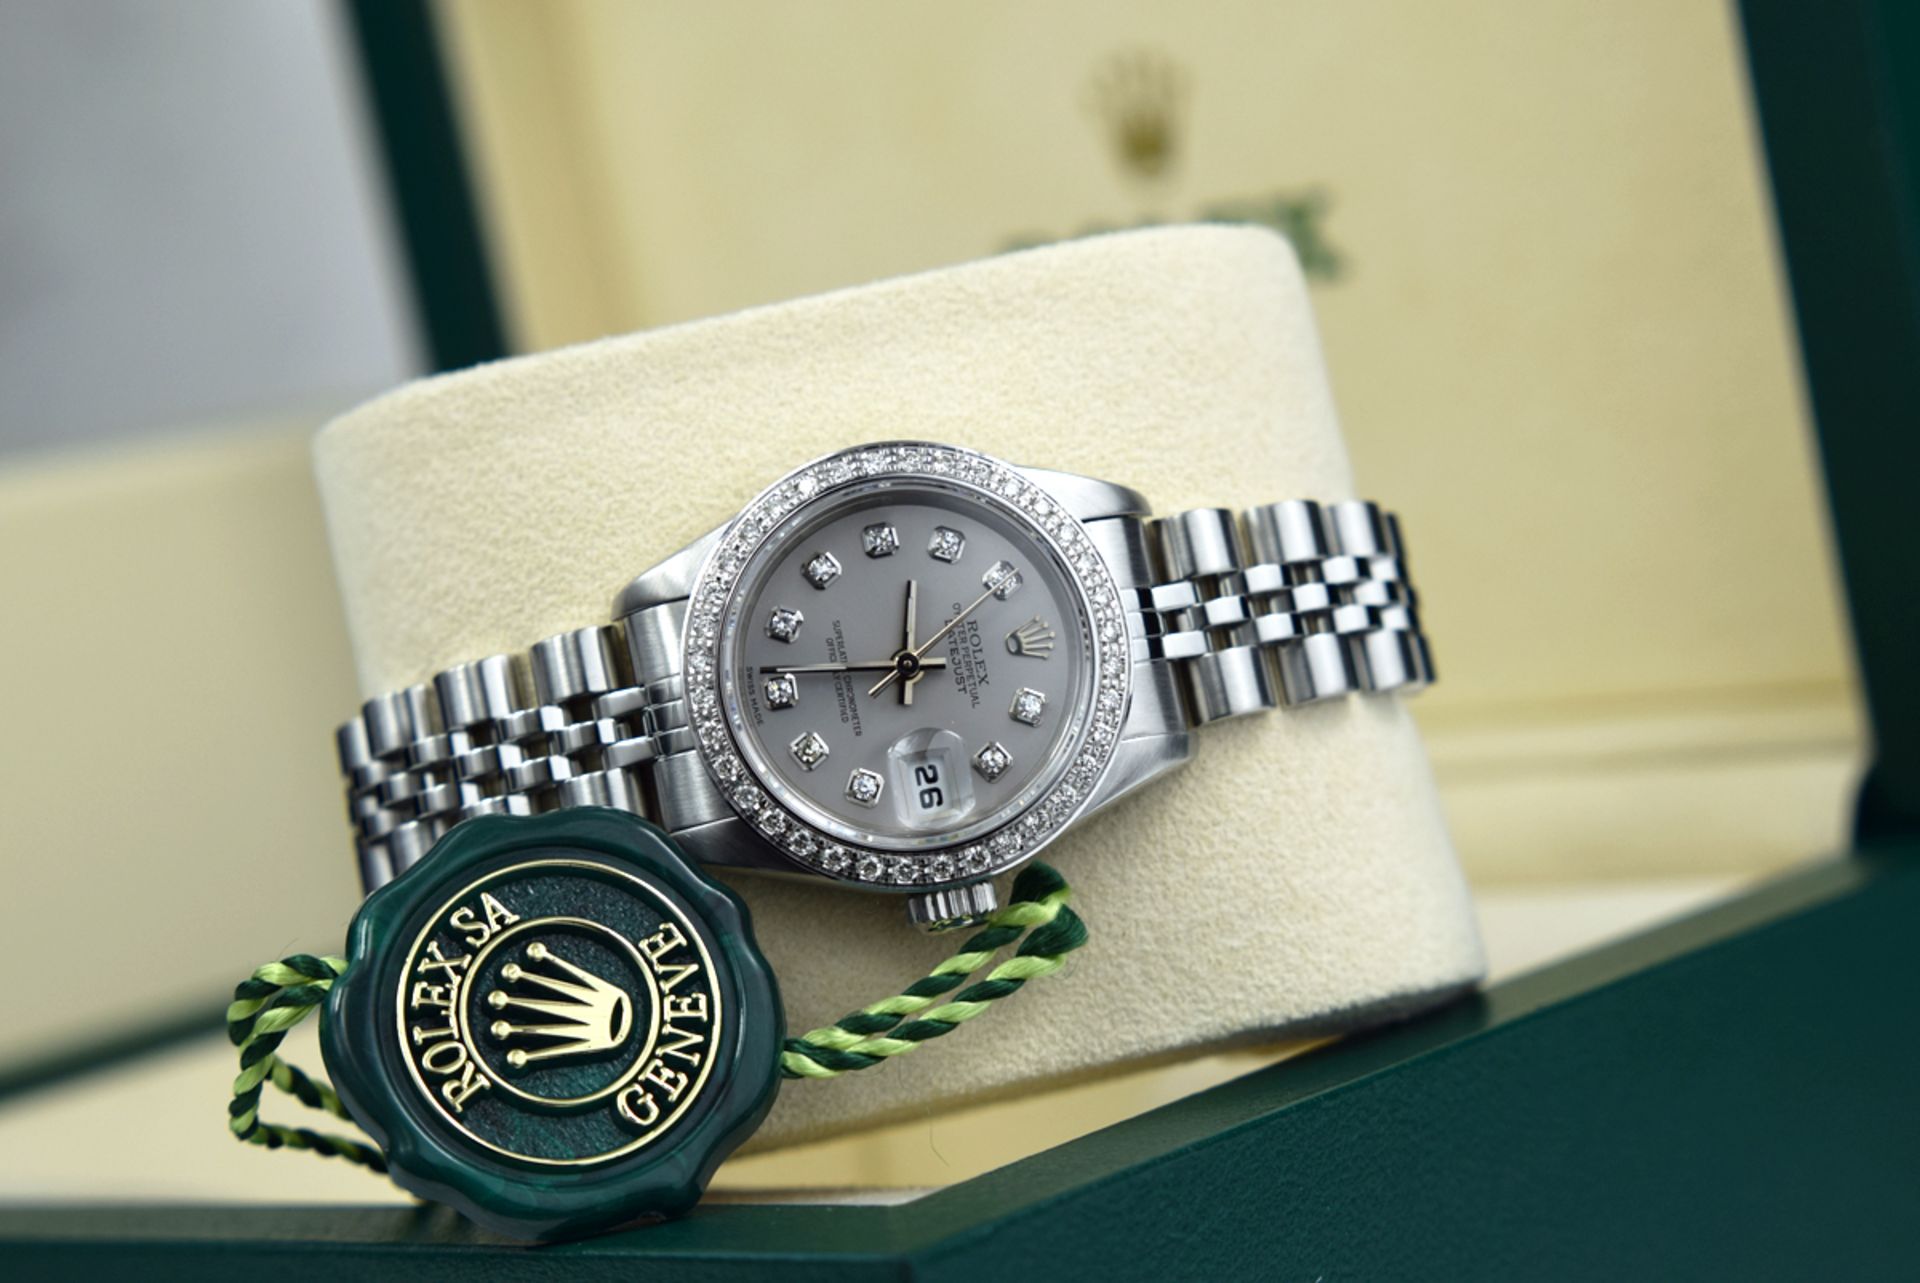 ROLEX *DIAMOND* LADY DATEJUST - 18K WHITE GOLD & STEEL with SILVER GREY DIAMOND DIAL - Image 5 of 12